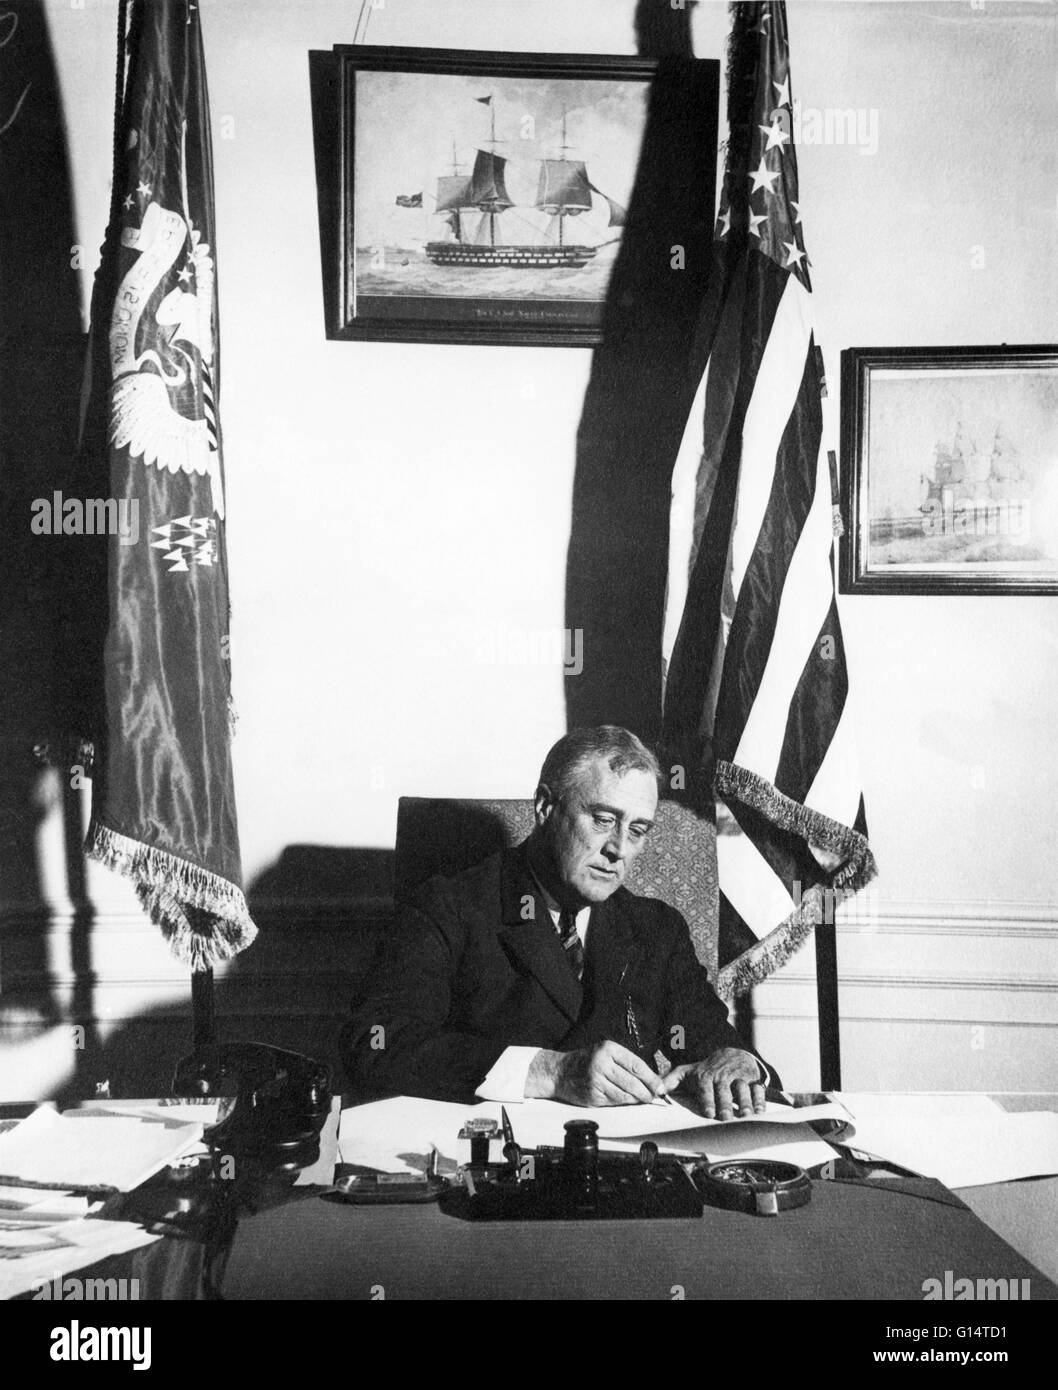 FDR signing the Emergency Banking Act of 1933, which authorized the government to strengthen, reorganize, and reopen solvent banks. Franklin Delano Roosevelt (January 30, 1882 - April 12, 1945) was the 32nd President of the United States (1933-1945) and a Stock Photo